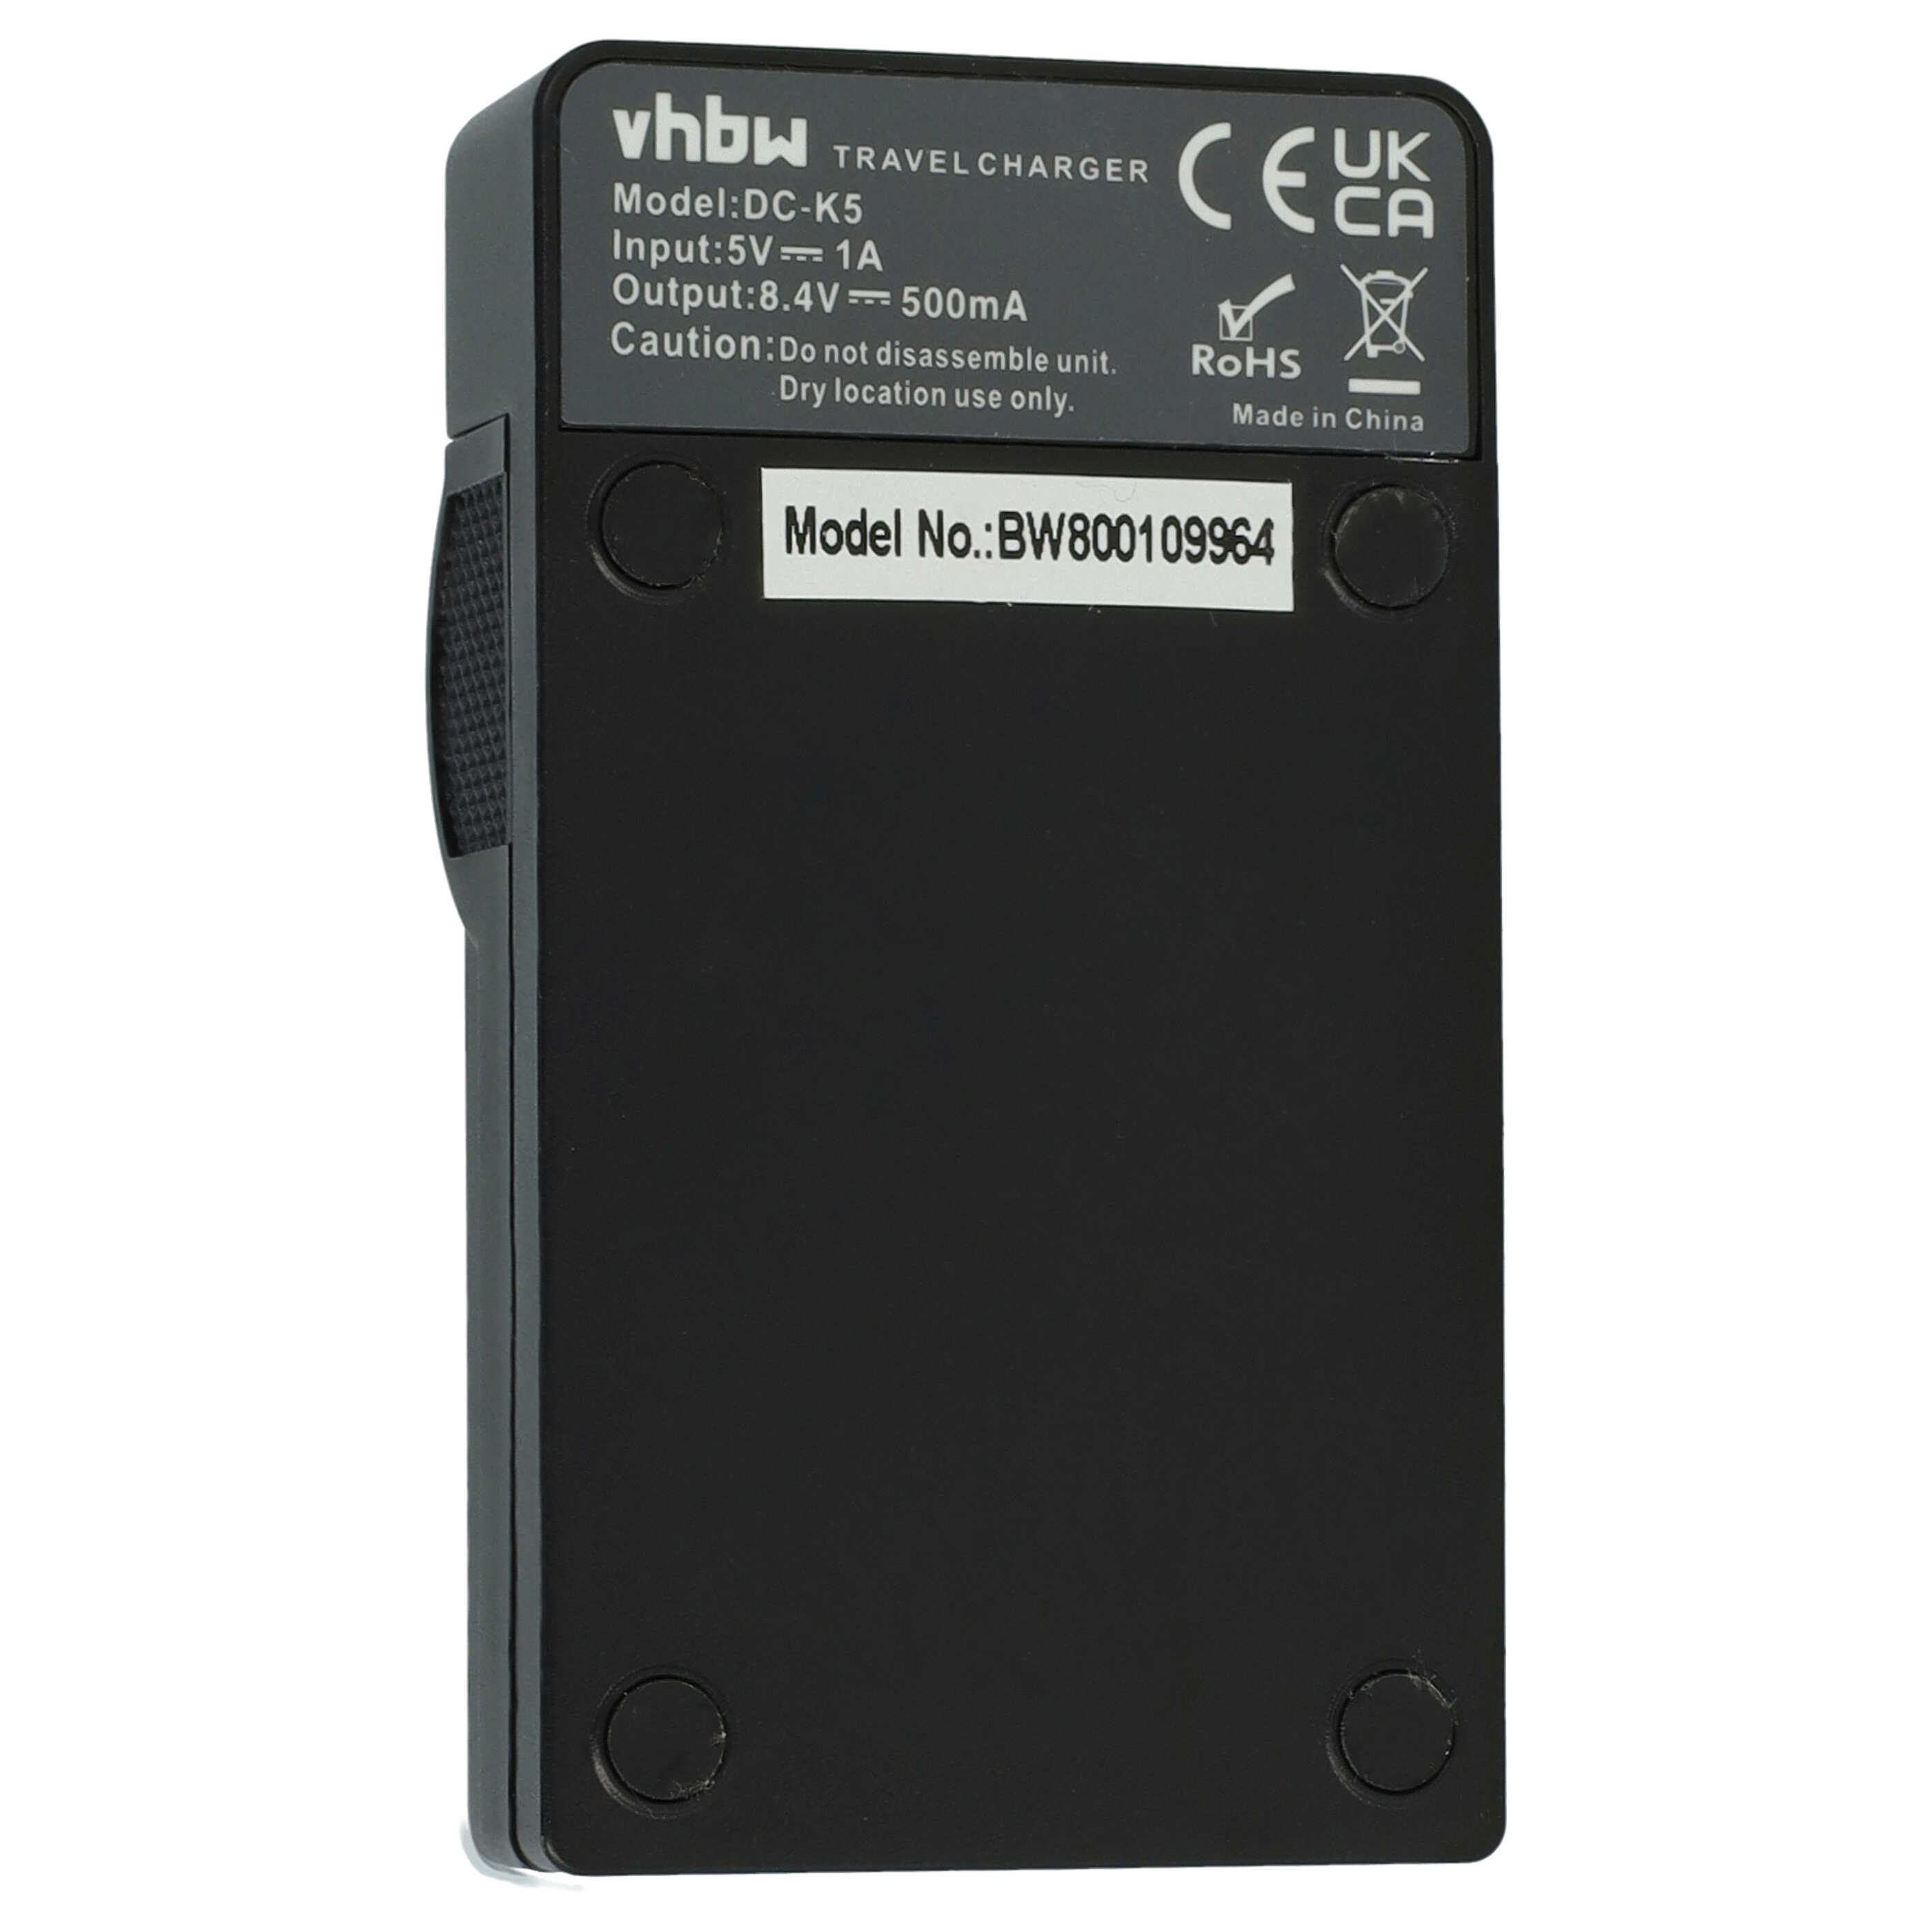 Battery Charger suitable for Olympus PS-BLN1 Camera etc. - 0.5 A, 8.4 V